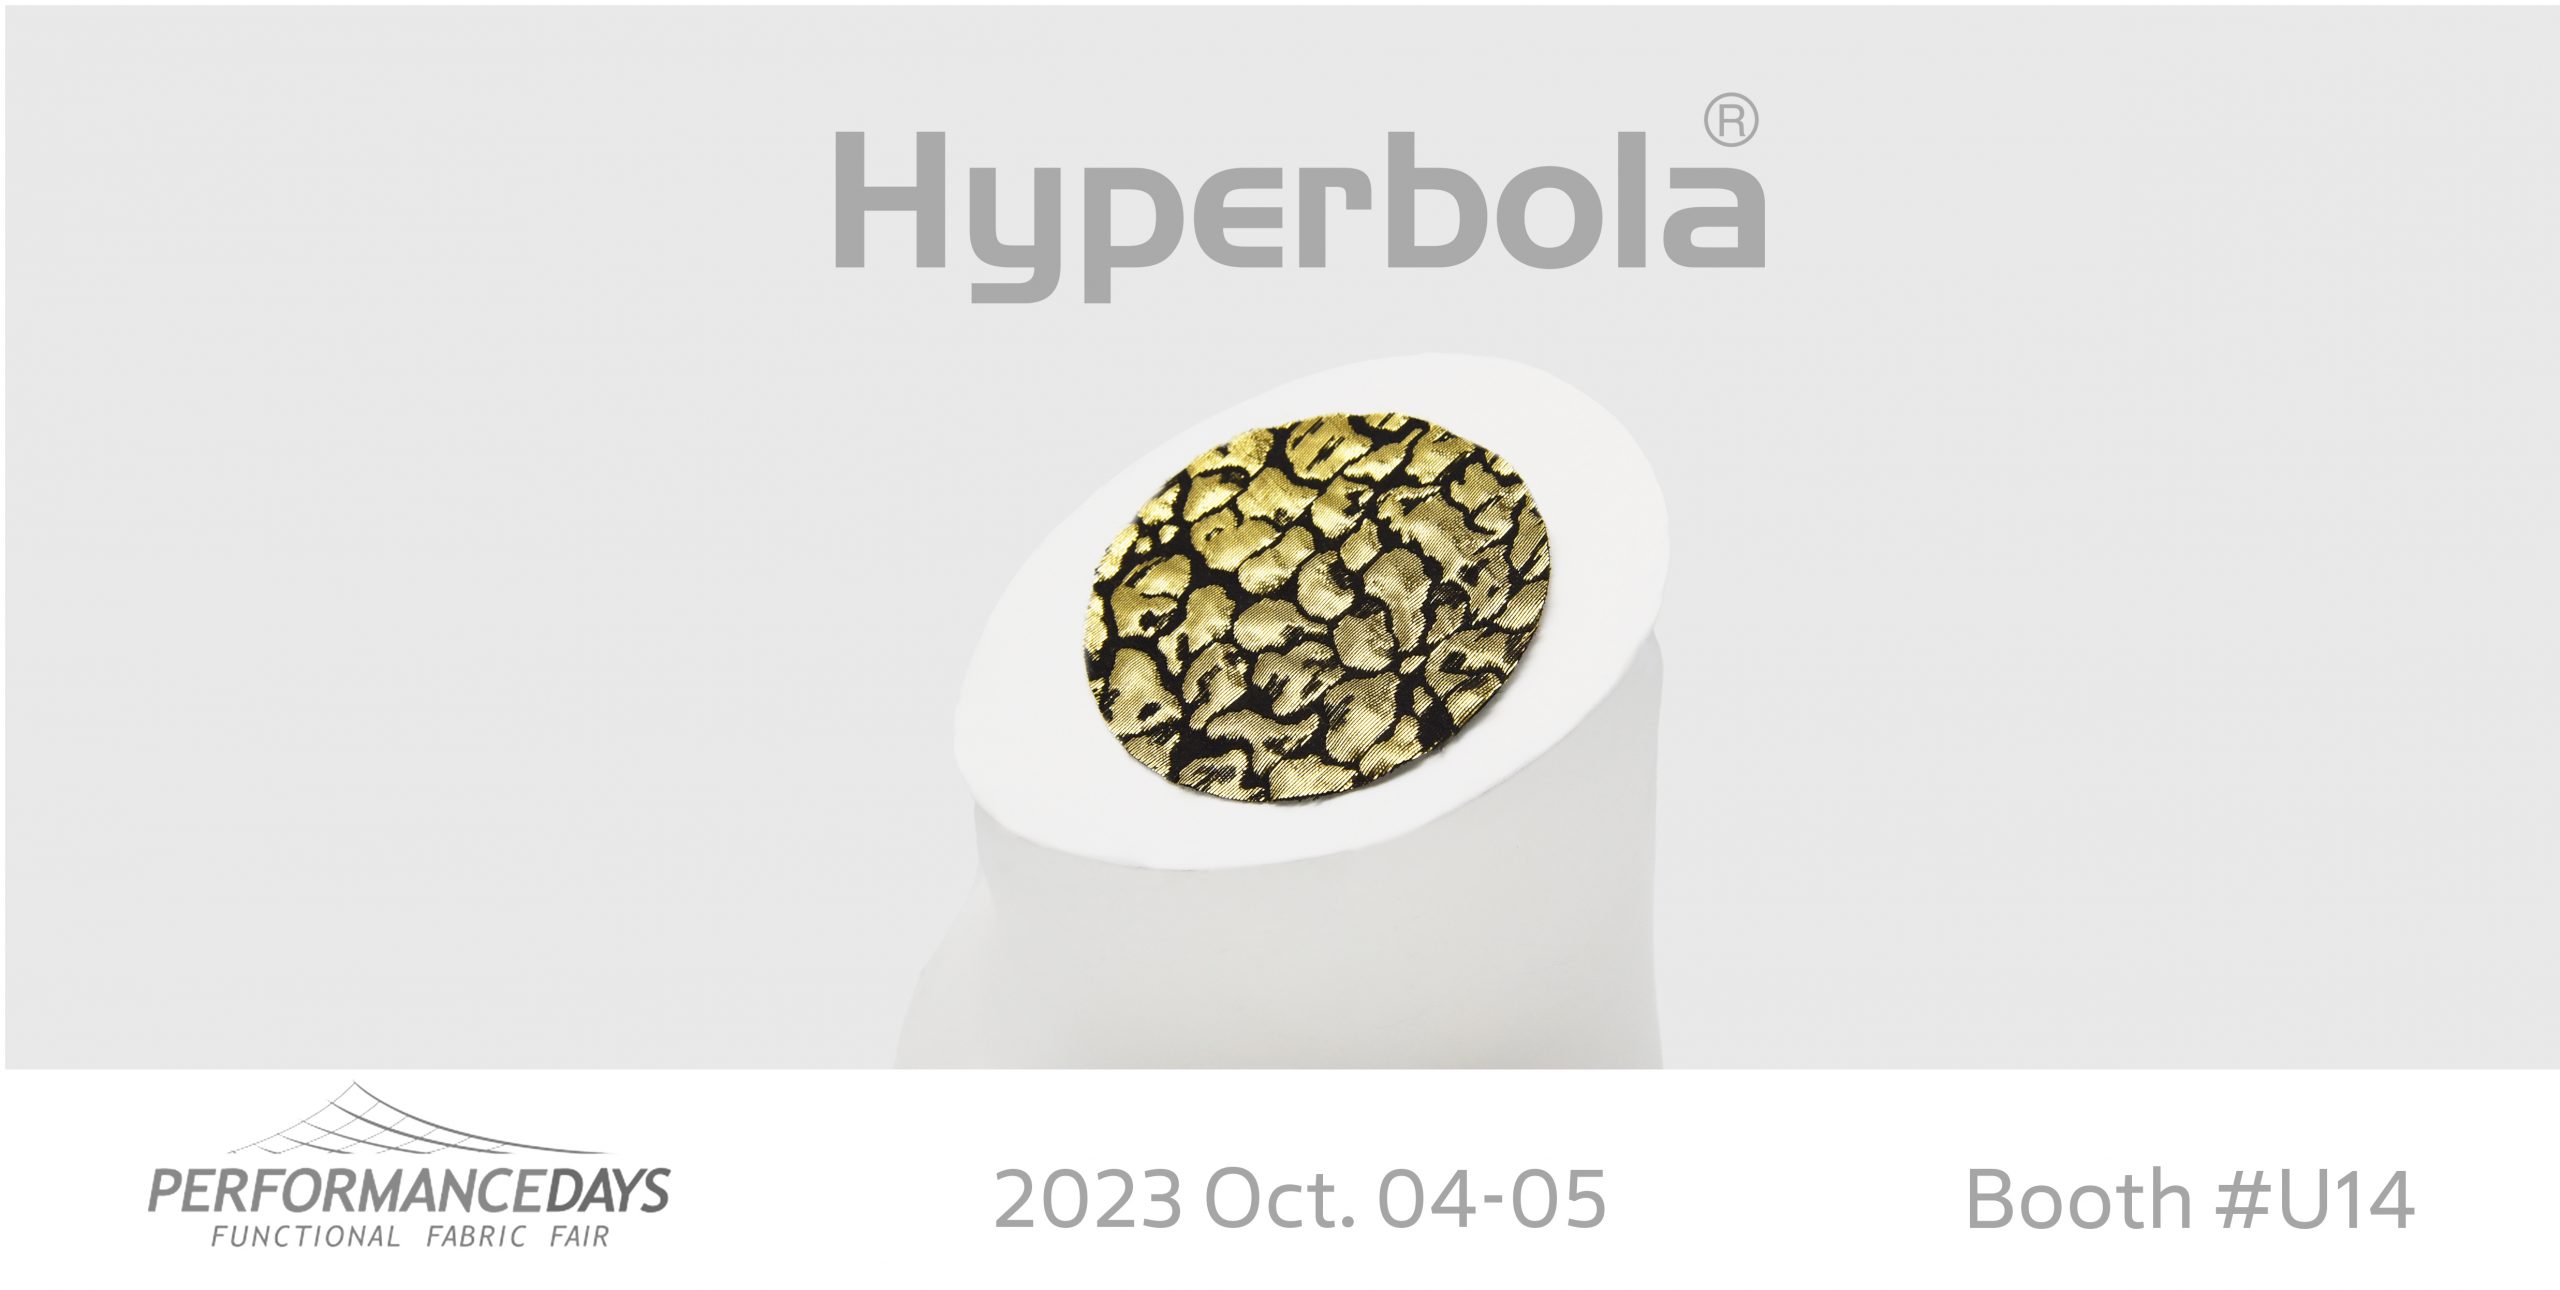 Hyperbola’s Stellar Fabric Selection for Performance Days Munich 2023 Oct 4-5™